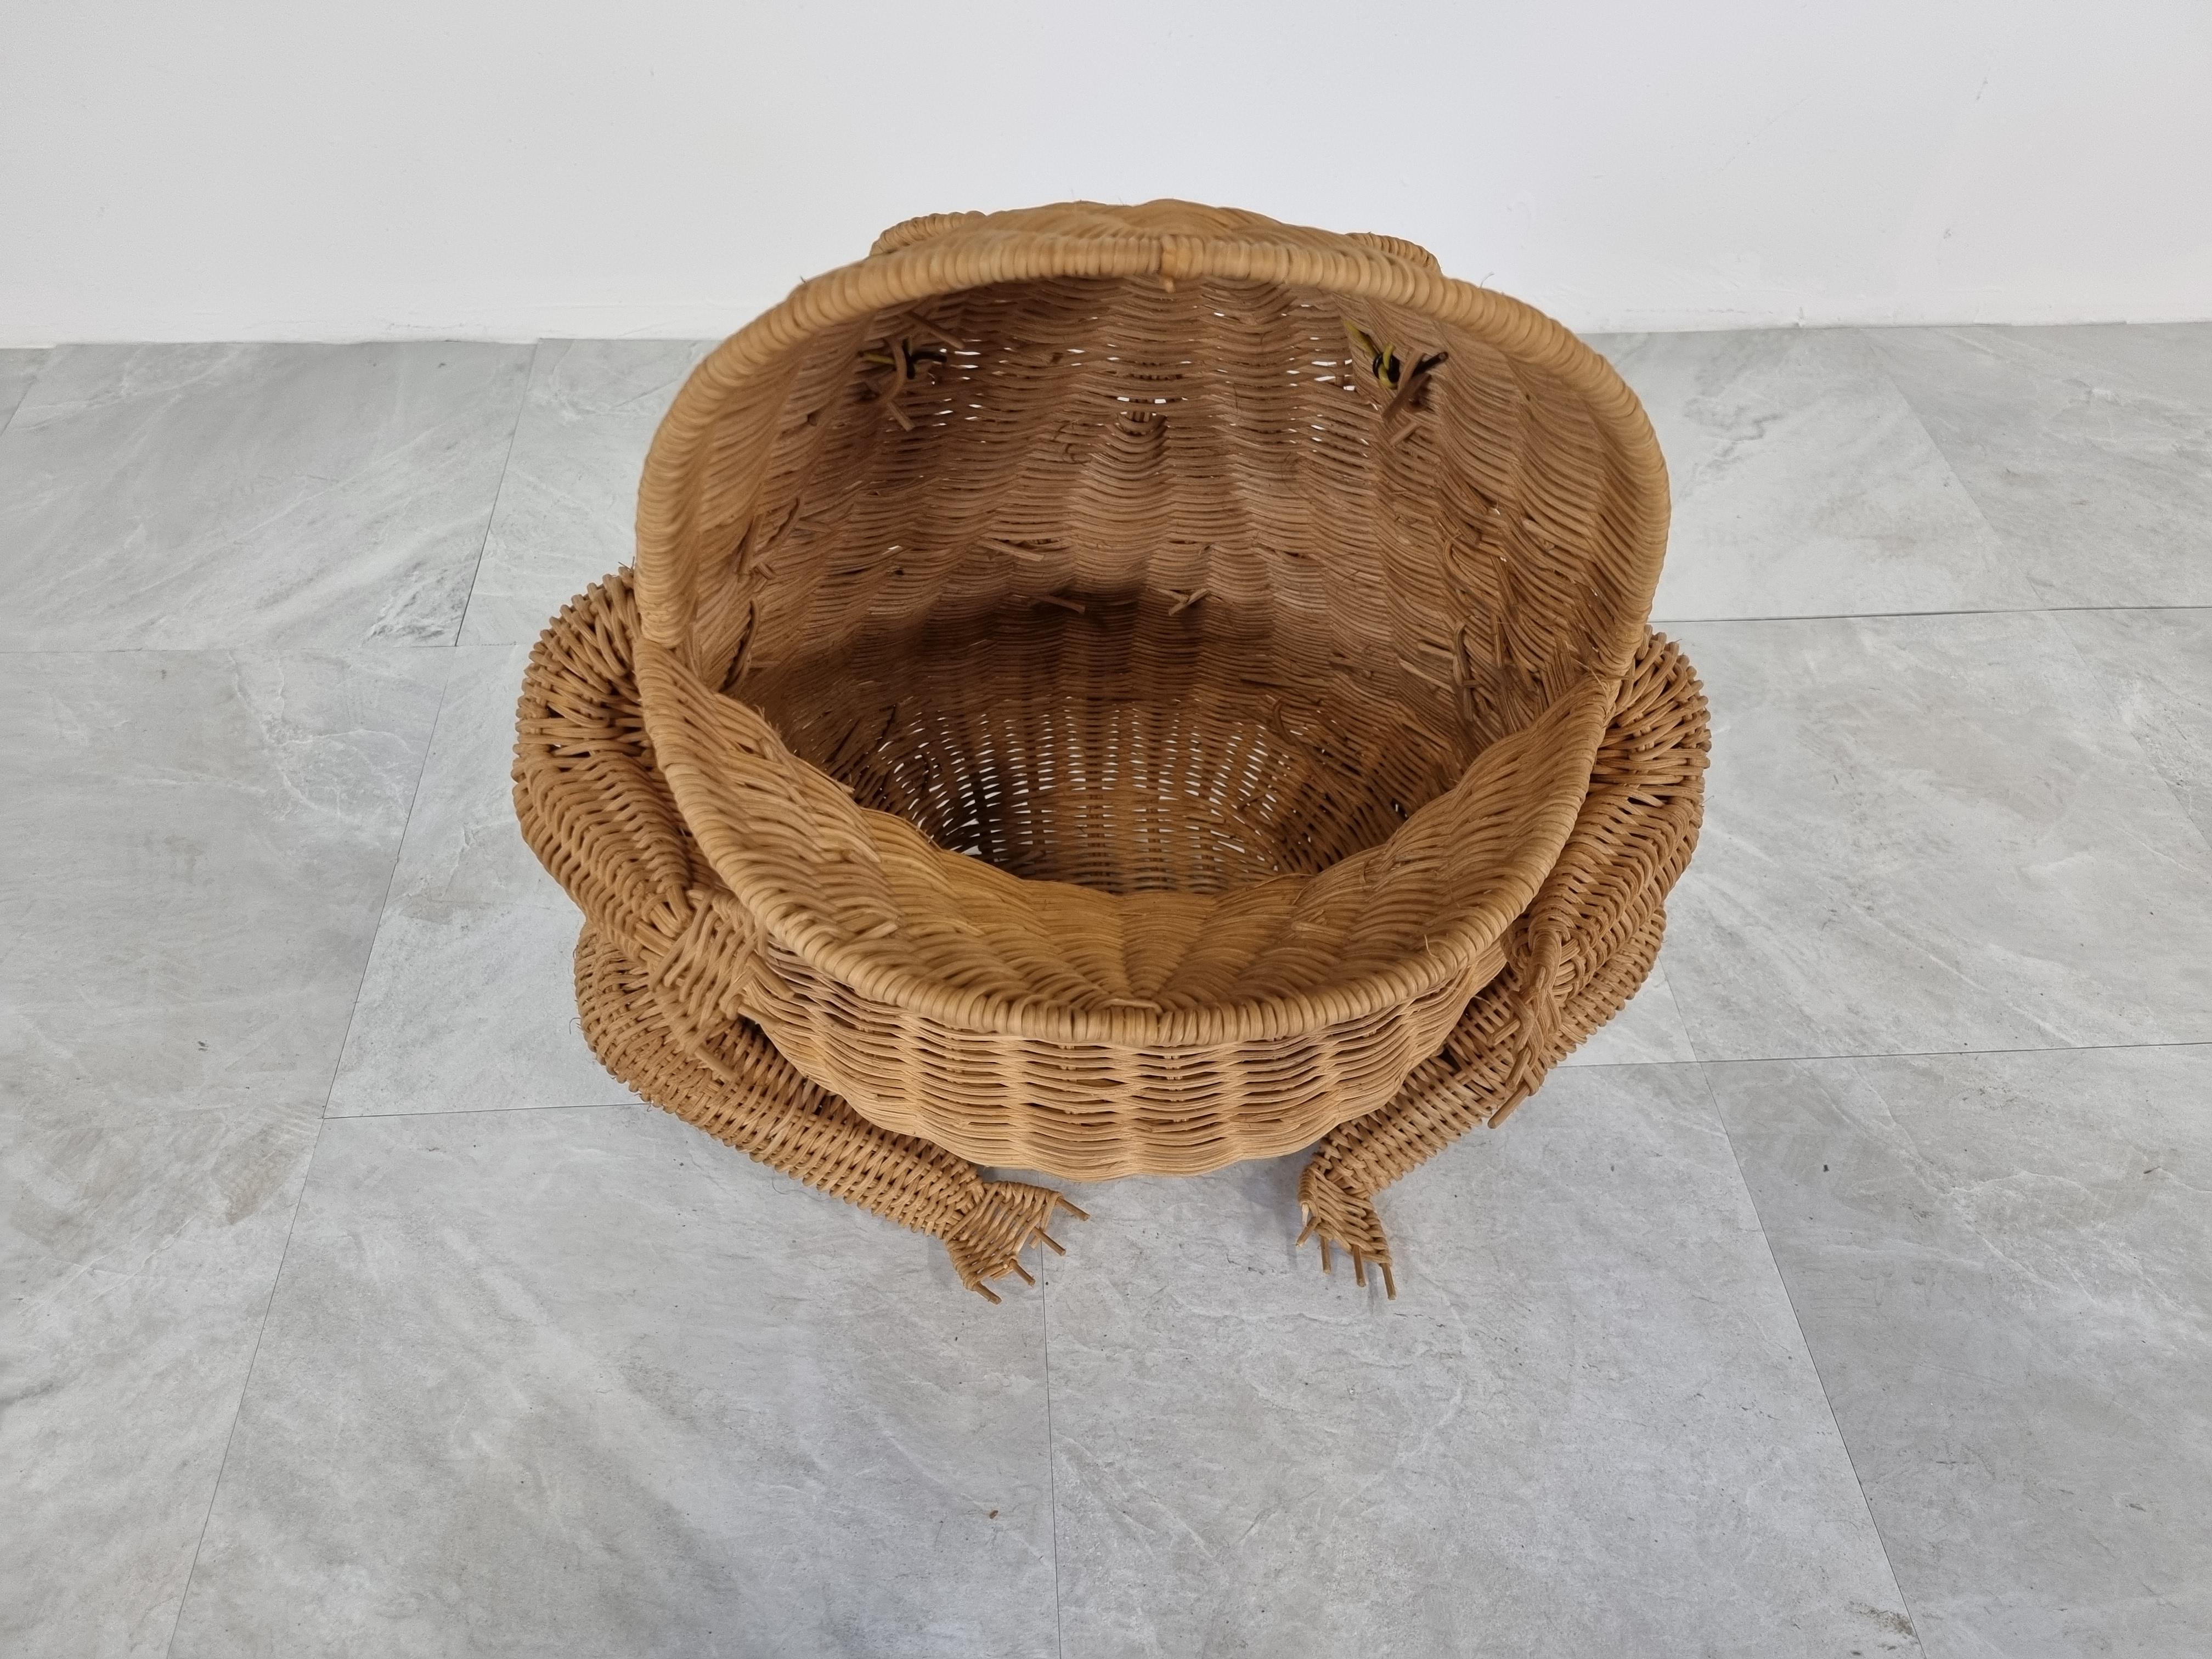 Fun mid century frog wicker magazine holder or basket by Olivier Cajan.

Cute little decorative pieces from the 1960s 

Good condition

1960s - France

Dimensions:
Height: 45cm/17.71